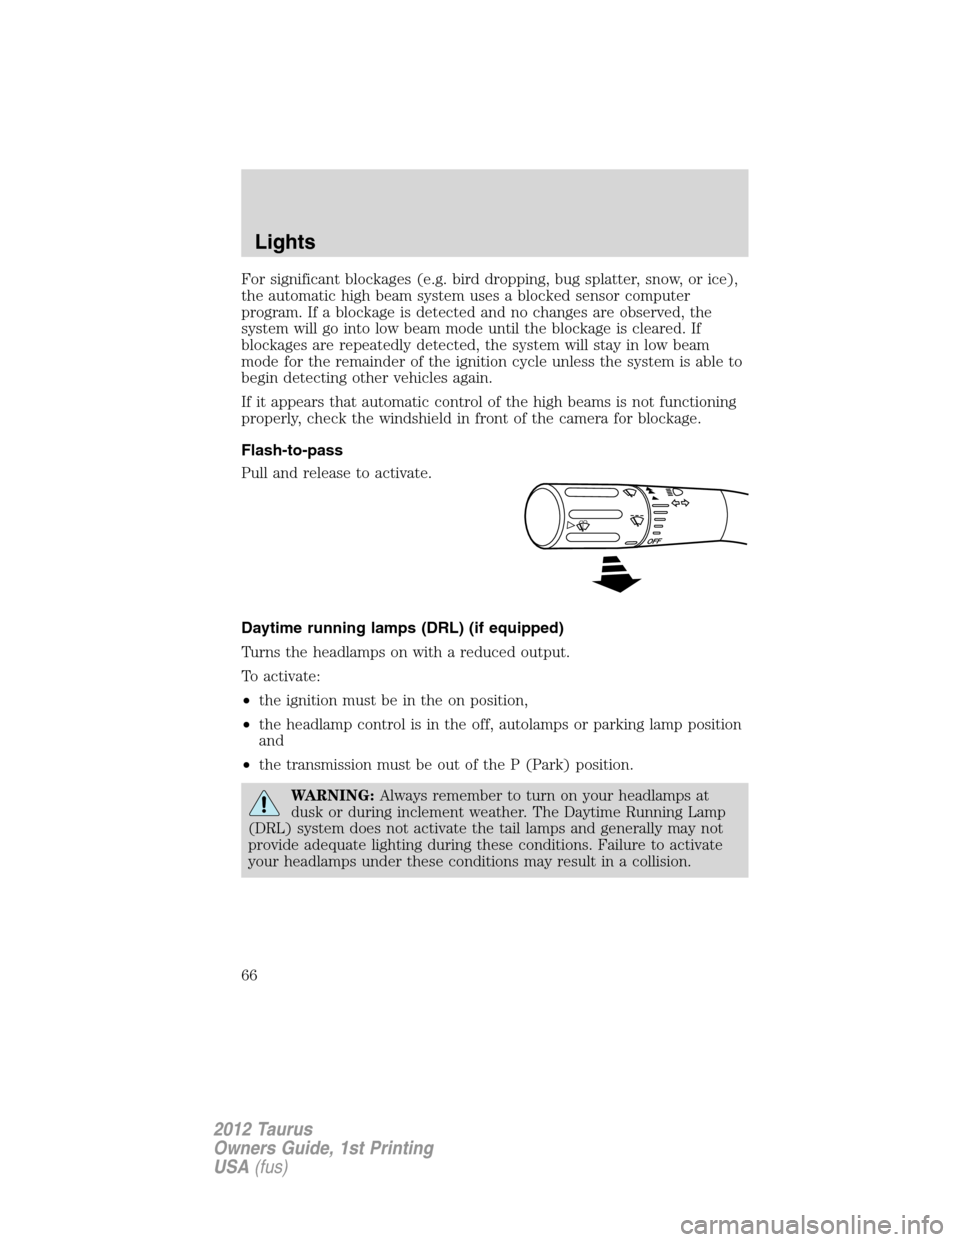 FORD TAURUS 2012 6.G Owners Manual For significant blockages (e.g. bird dropping, bug splatter, snow, or ice),
the automatic high beam system uses a blocked sensor computer
program. If a blockage is detected and no changes are observed